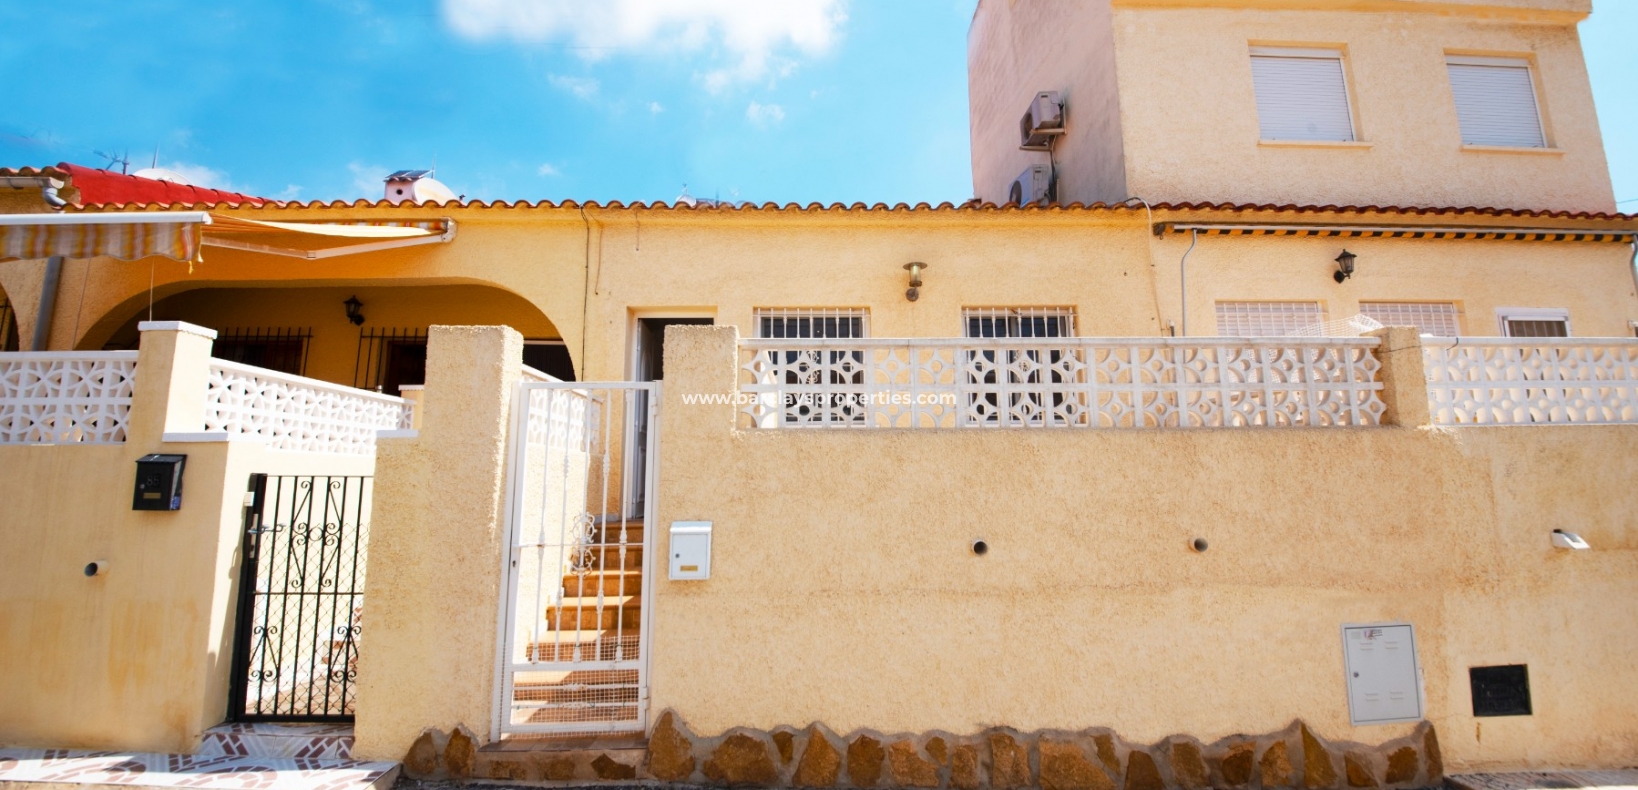 House - South Facing Terraced House For Sale in Alicante, Spain